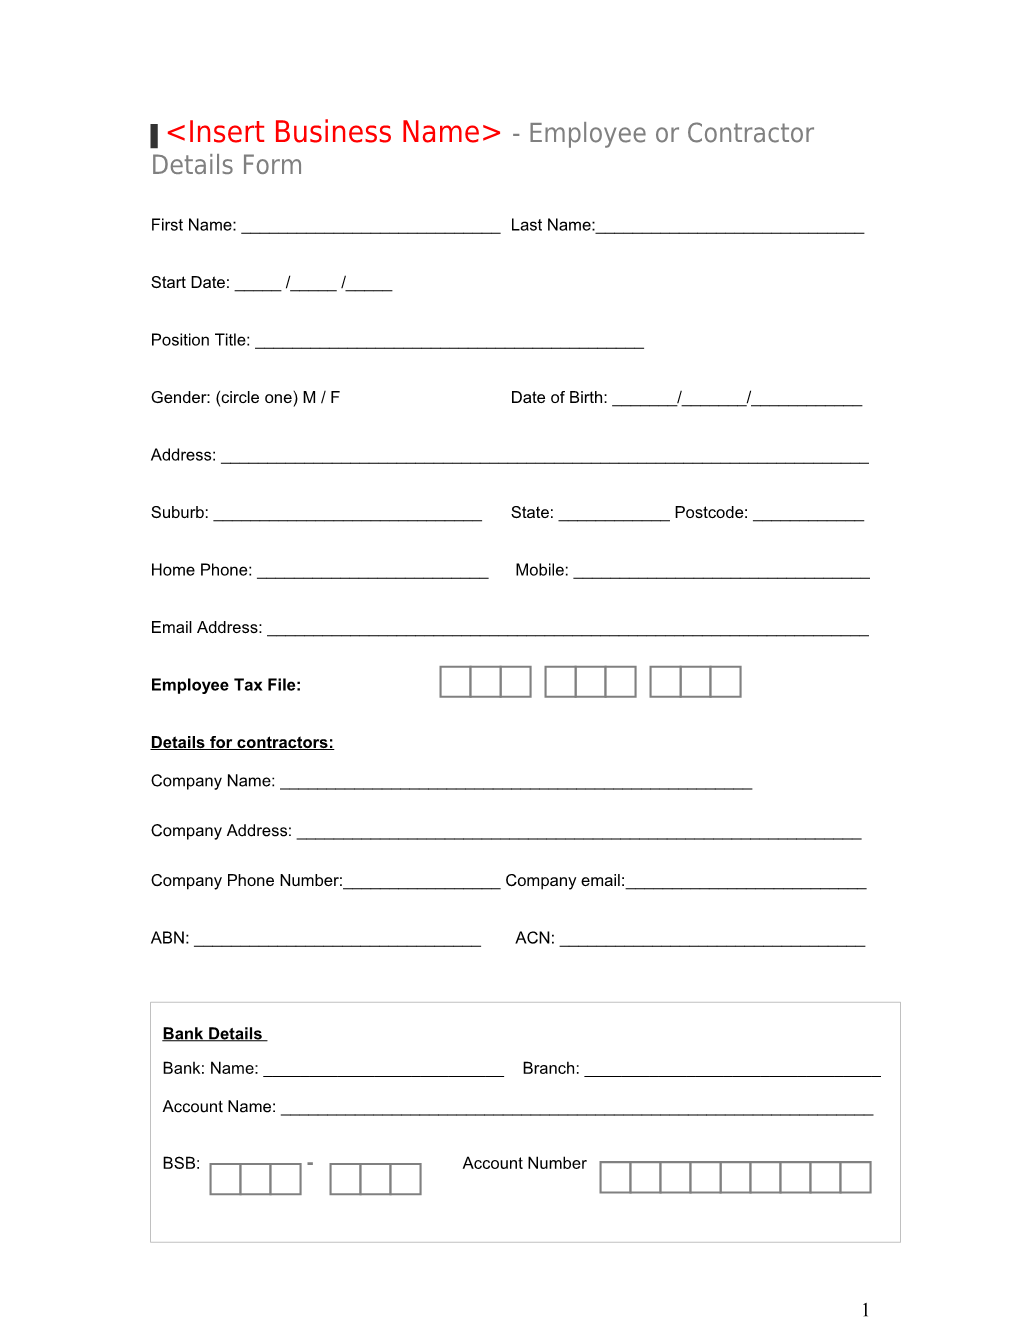 Employee Details Form Template